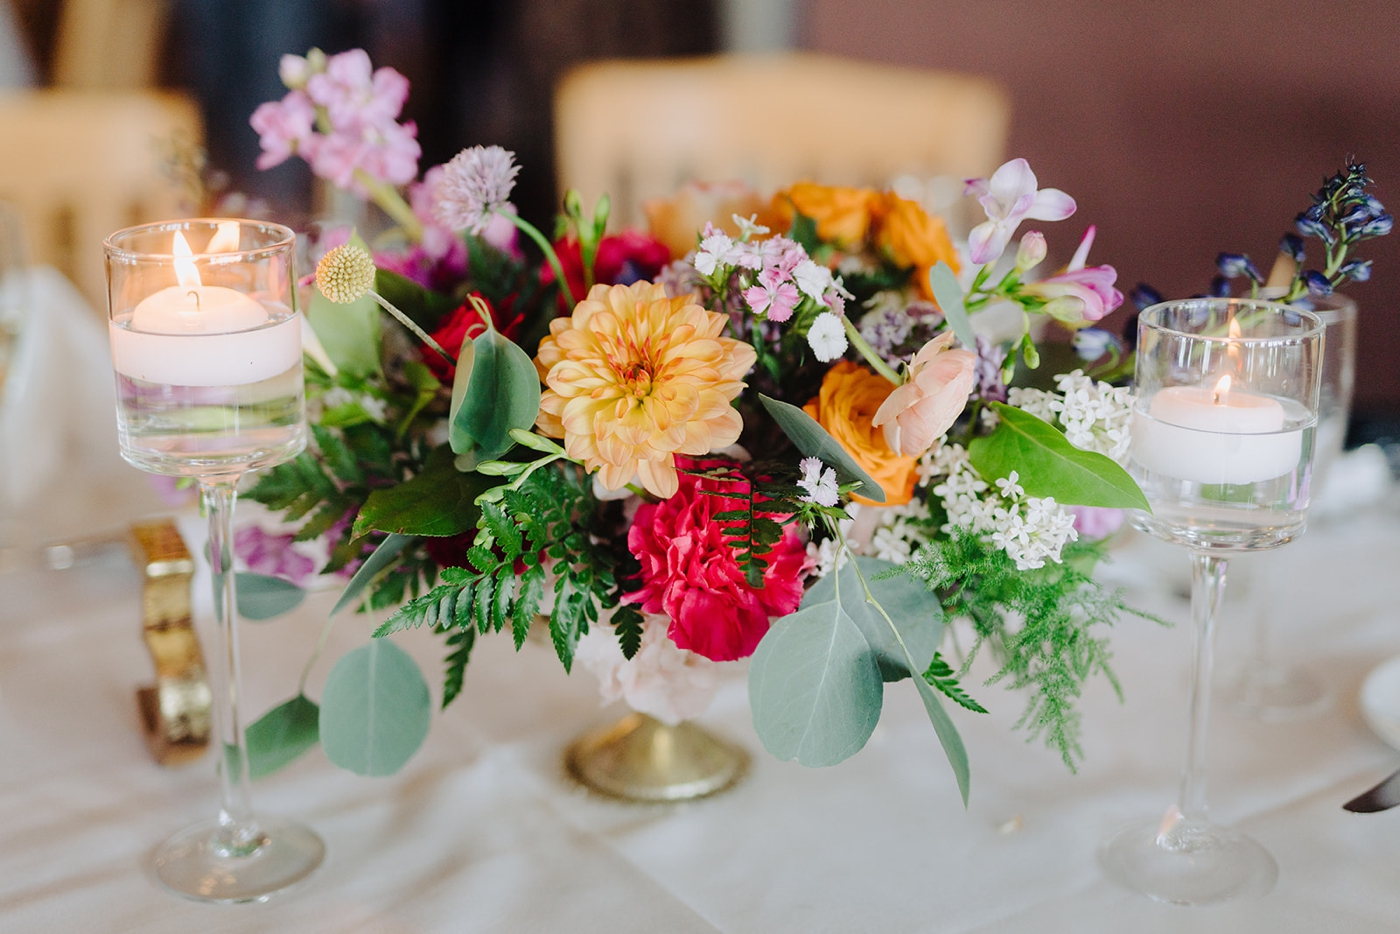 Floating candles and purple, pink, and orange floral centerpieces for a spring wedding reception